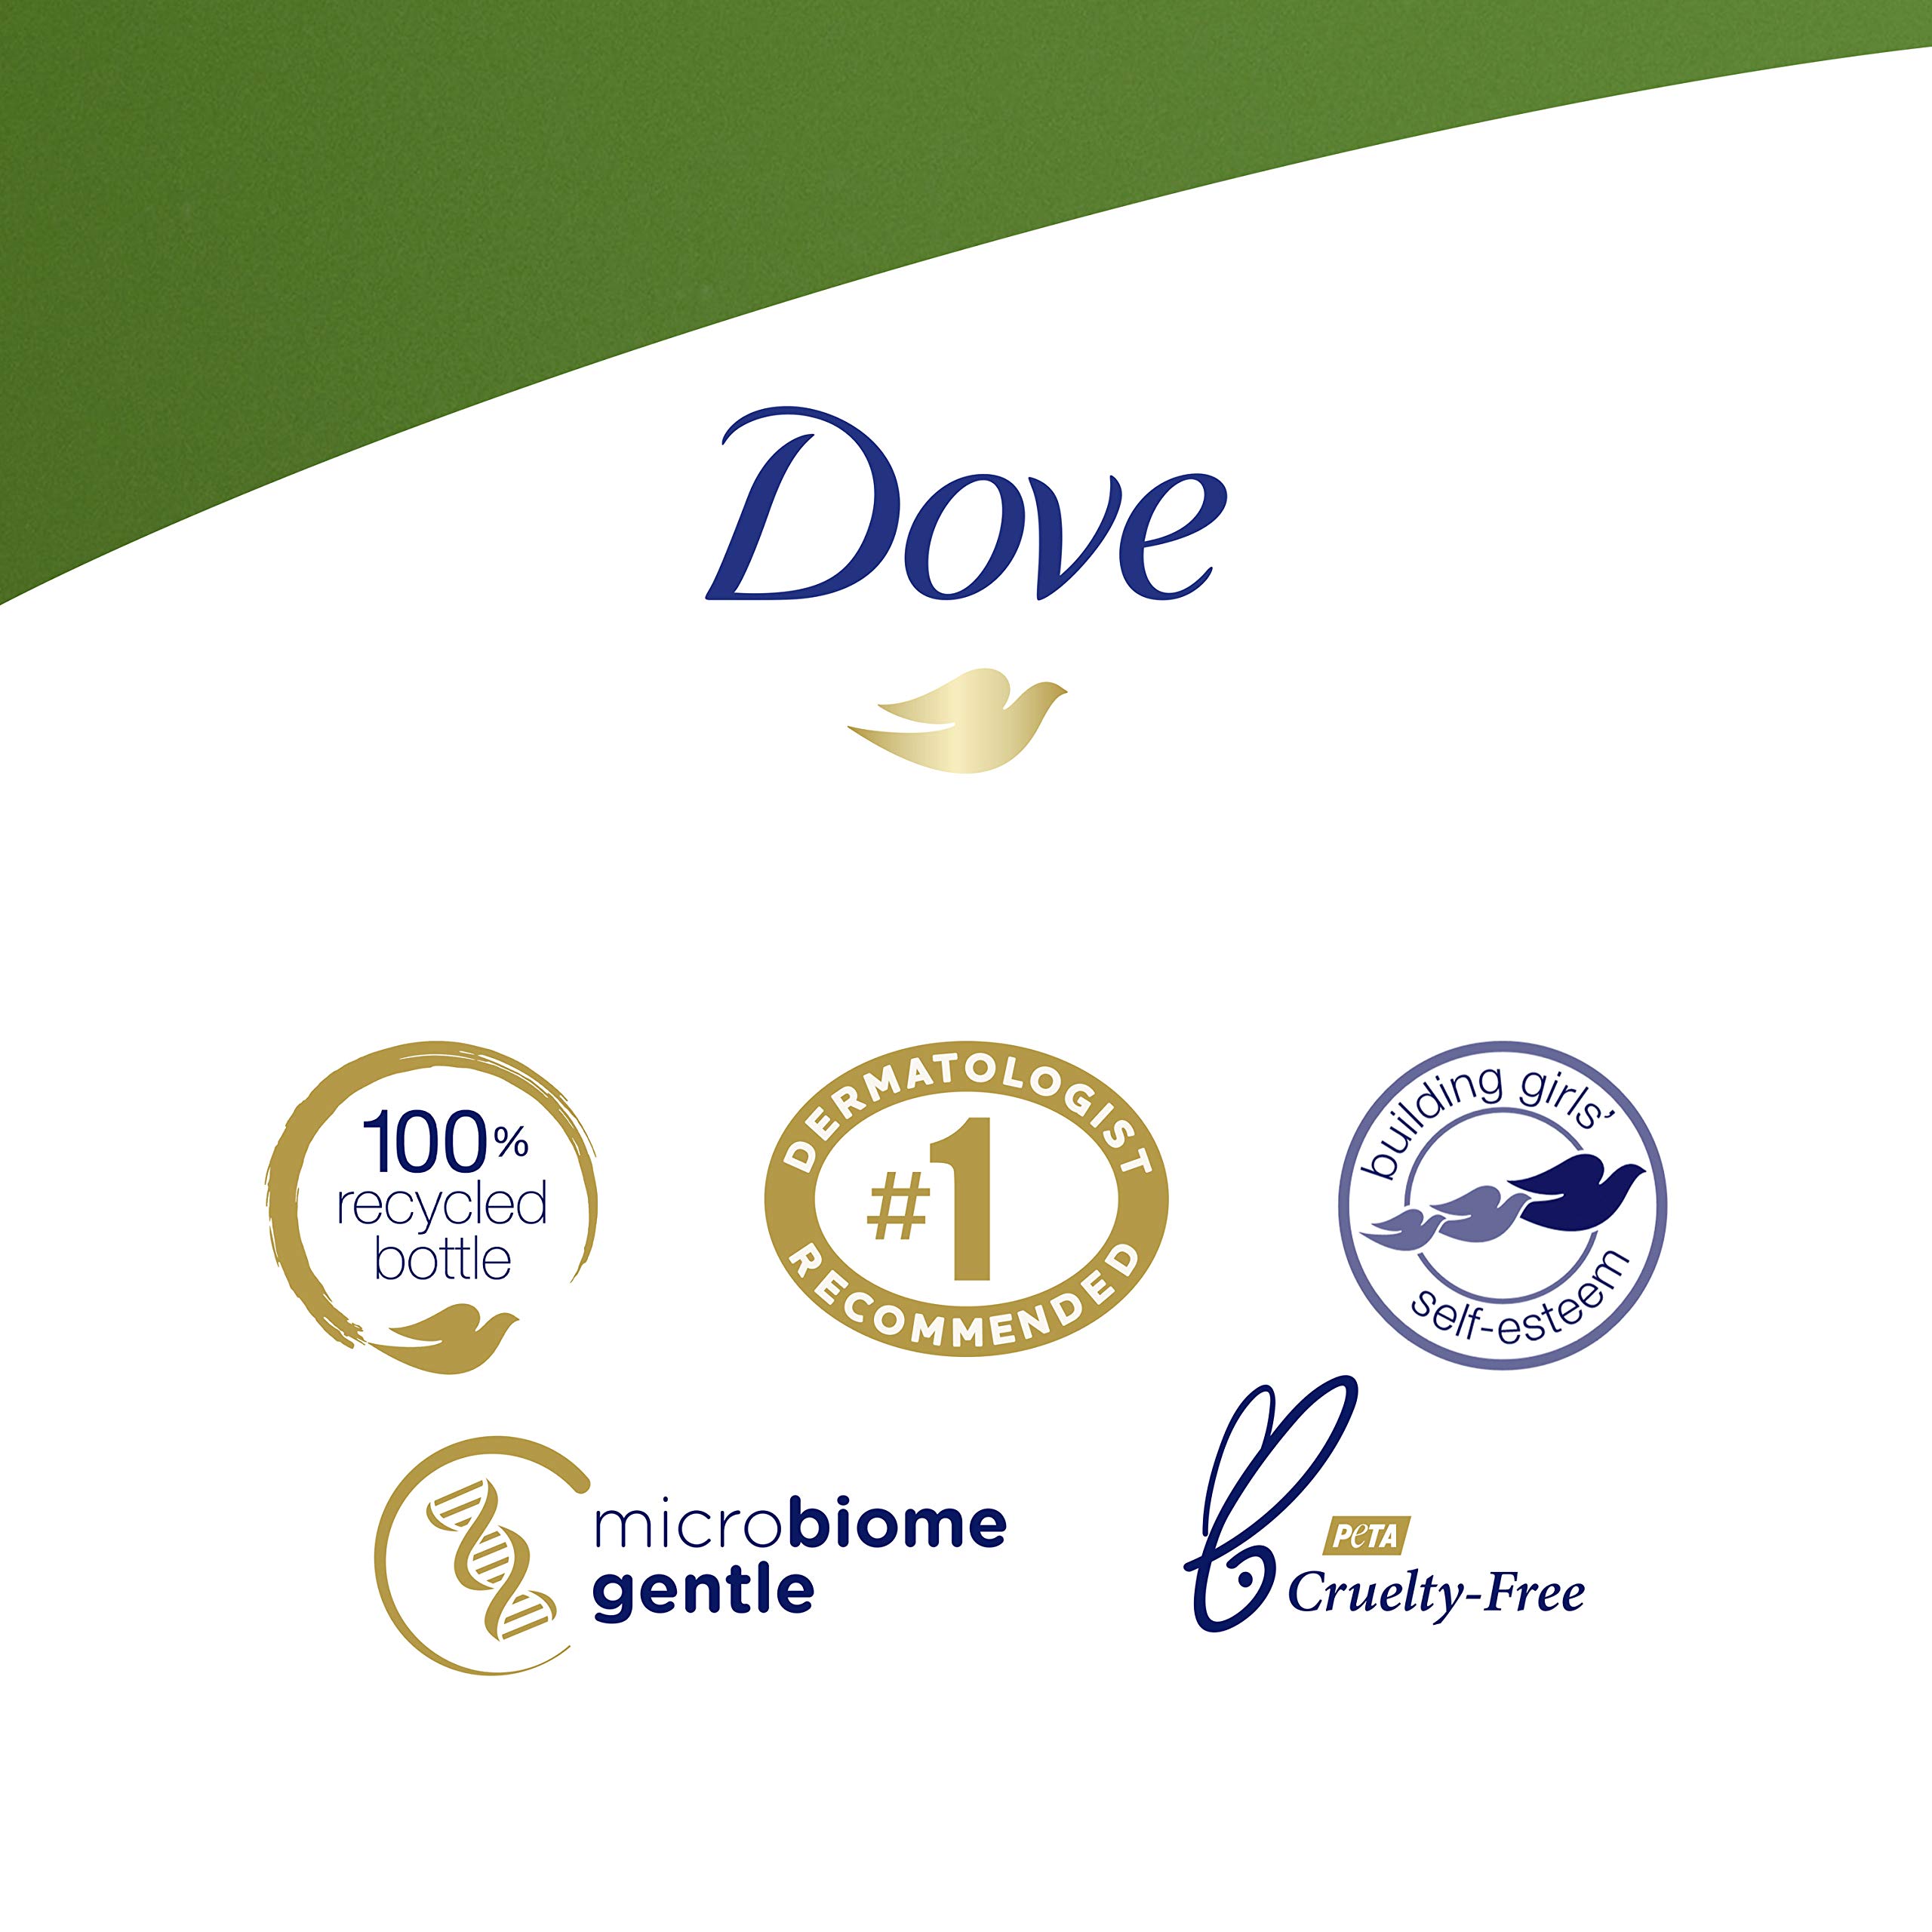 Dove Refreshing Body Wash with Pump Revitalizes and Refreshes Skin Cucumber and Green Tea Effectively Washes Away Bacteria While Nourishing Your Skin, 34 Fl Oz (Pack of 3)